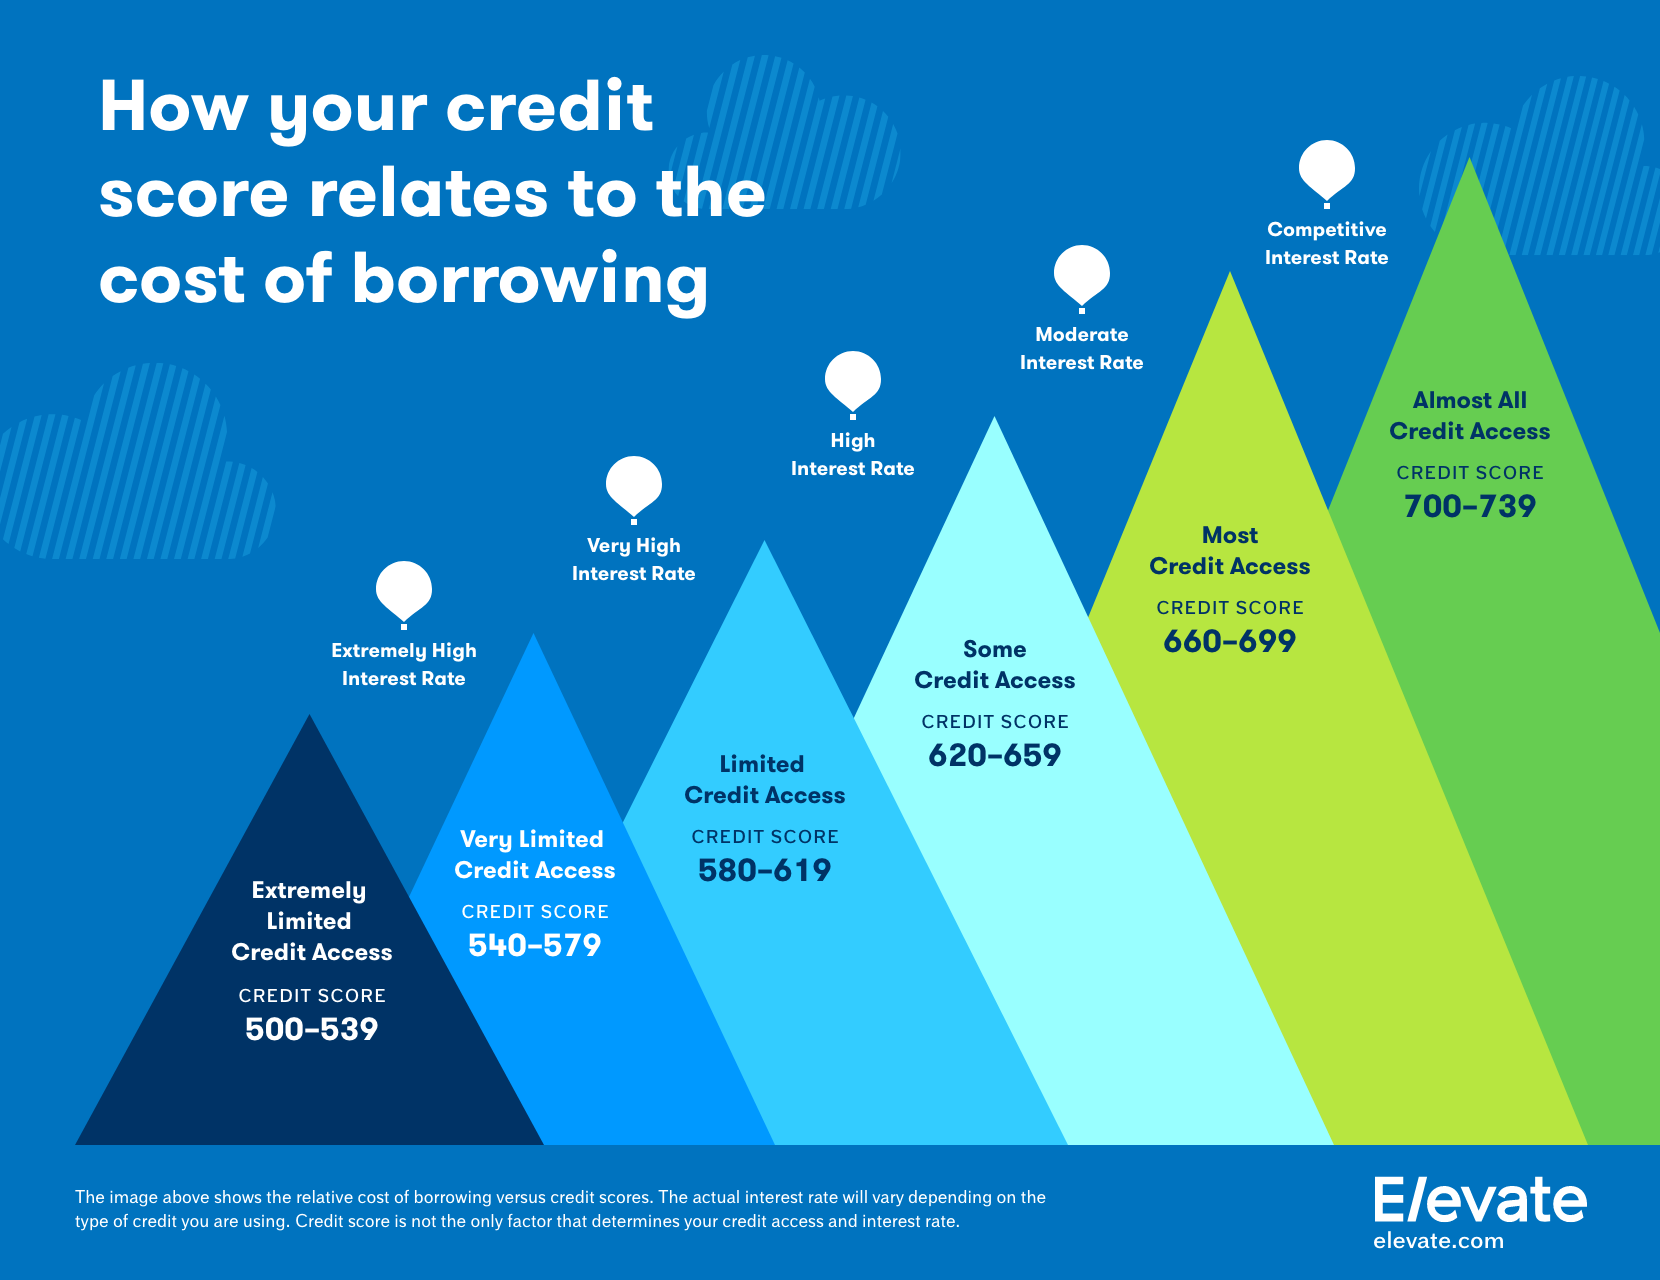 Infographic of how your credit score relates to the cost of borrowing, showing how interest rates decrease with higher credit scores.